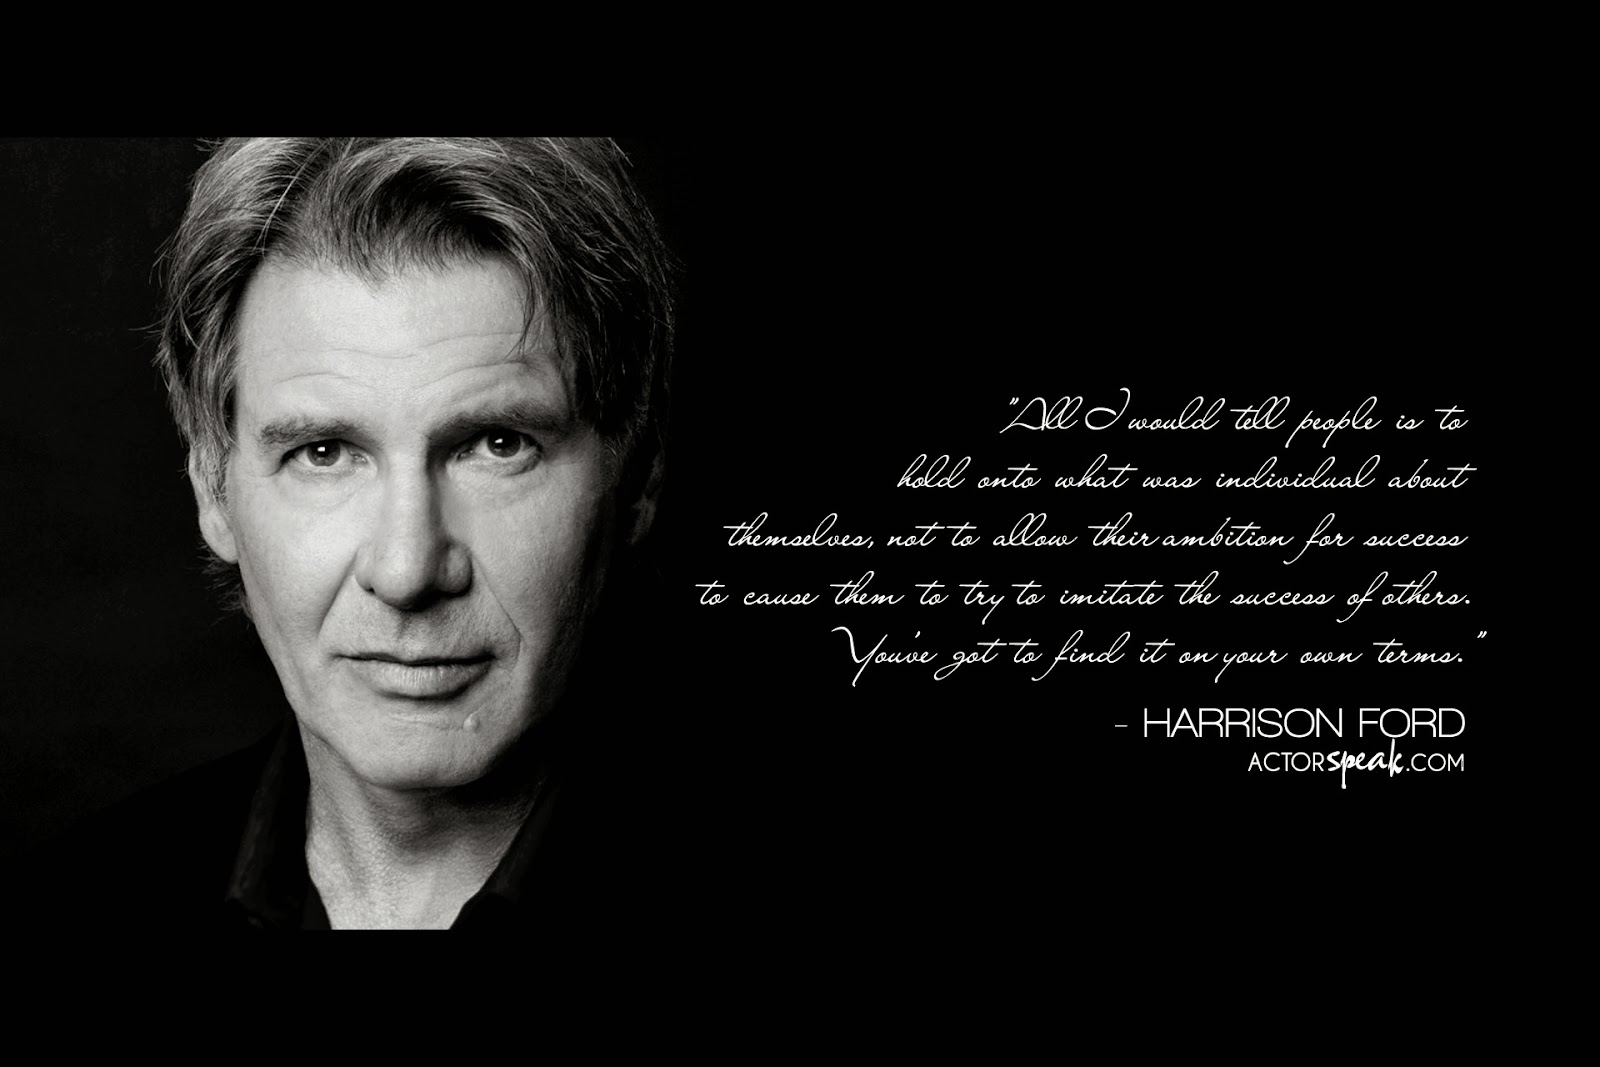 Star wars harrison ford quotes